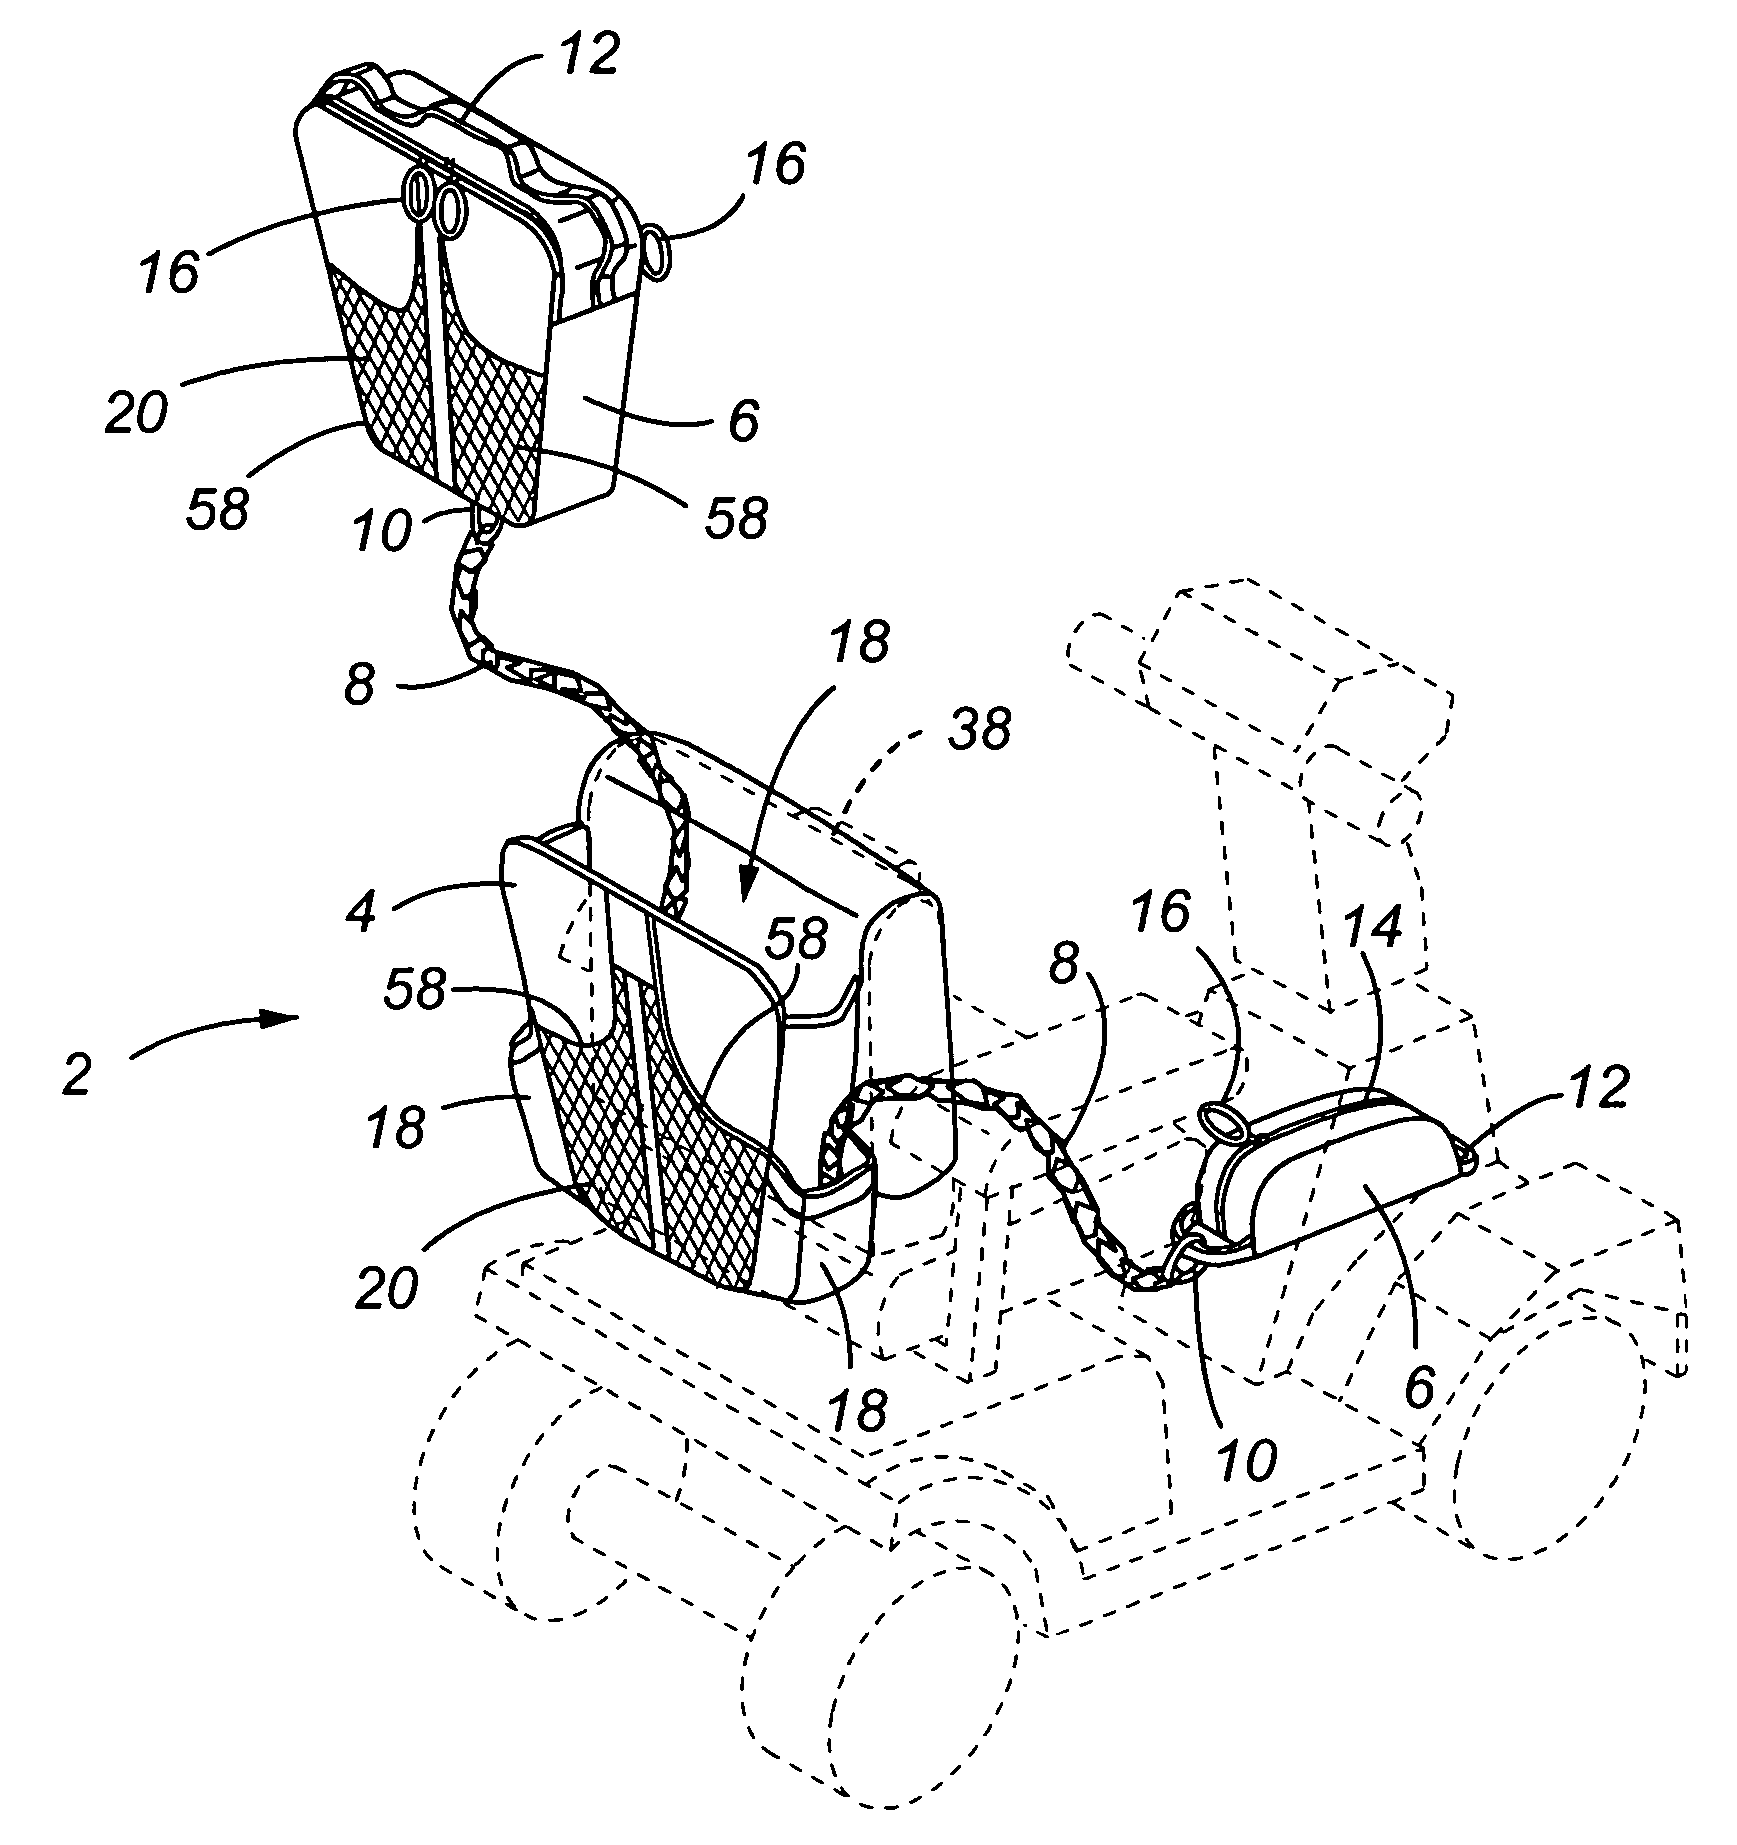 Personal storage apparatus for wheelchairs and other mobility assistance devices